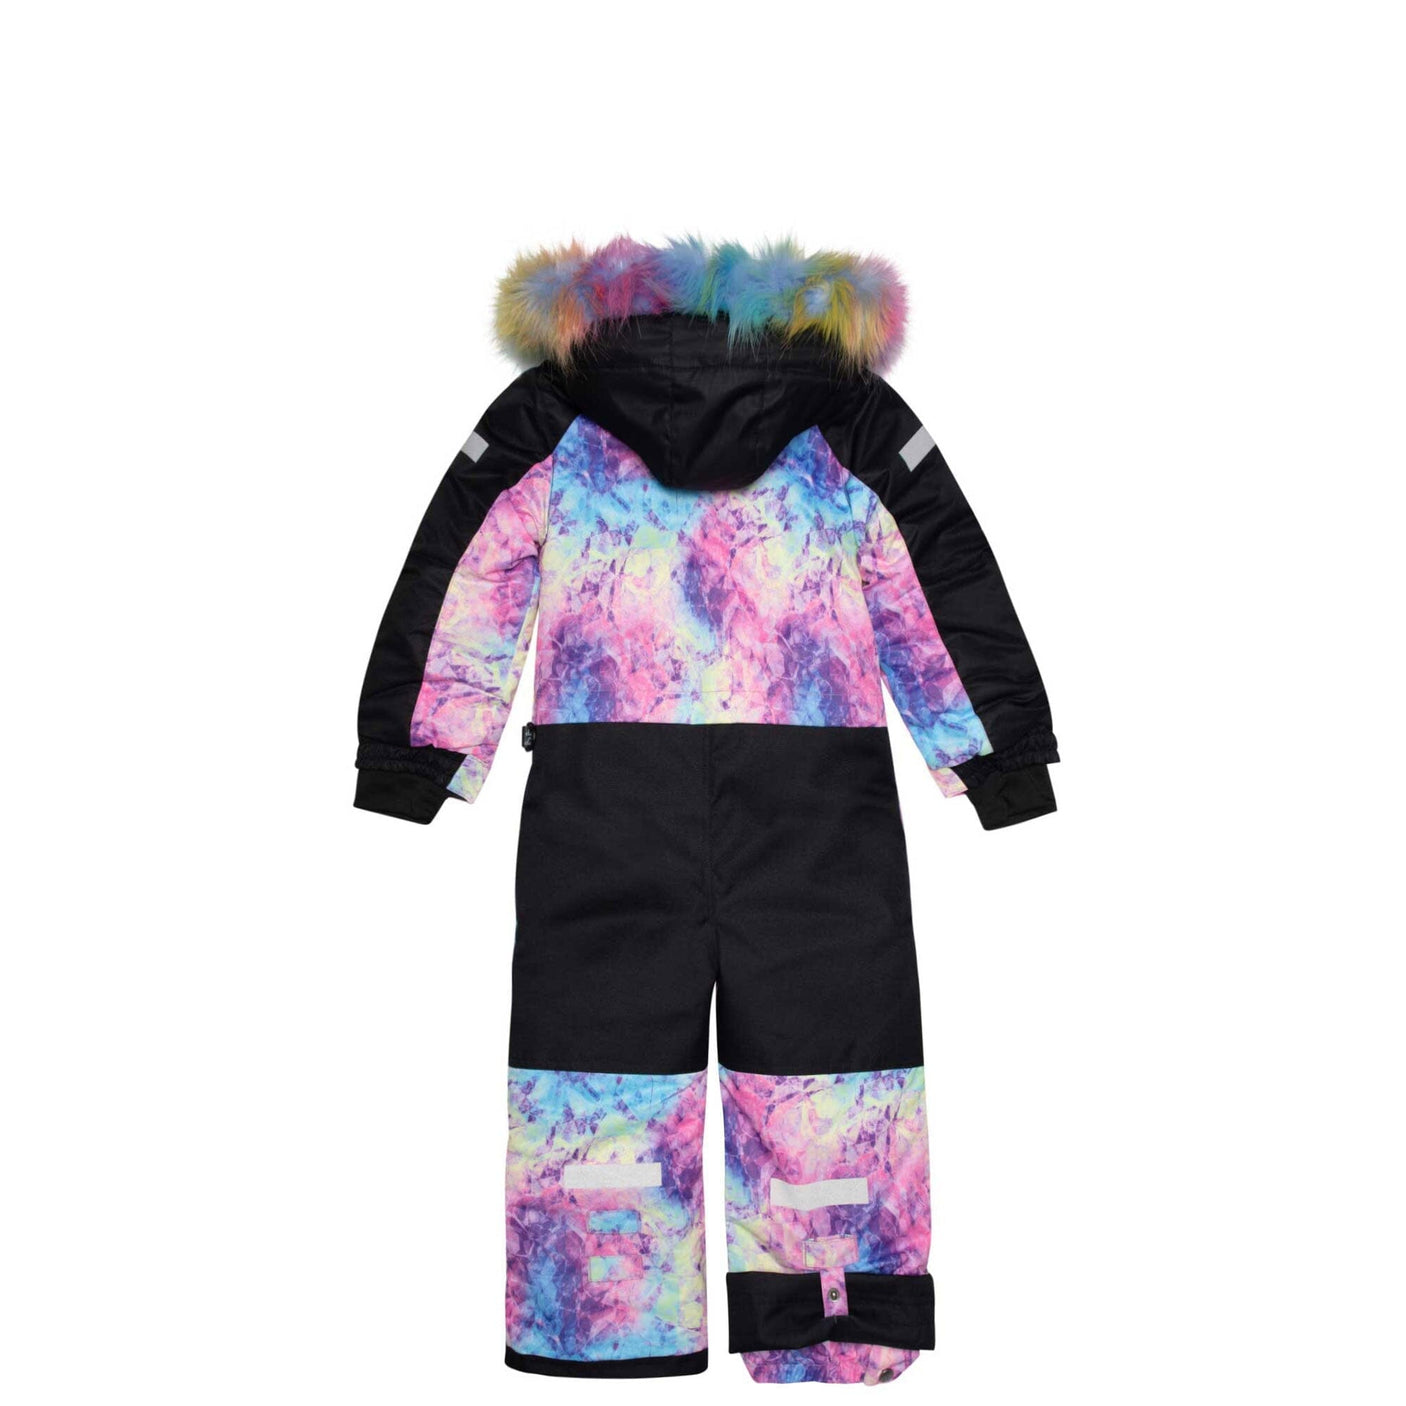 One Piece Snowsuit With Frosted Rainbow Print-4